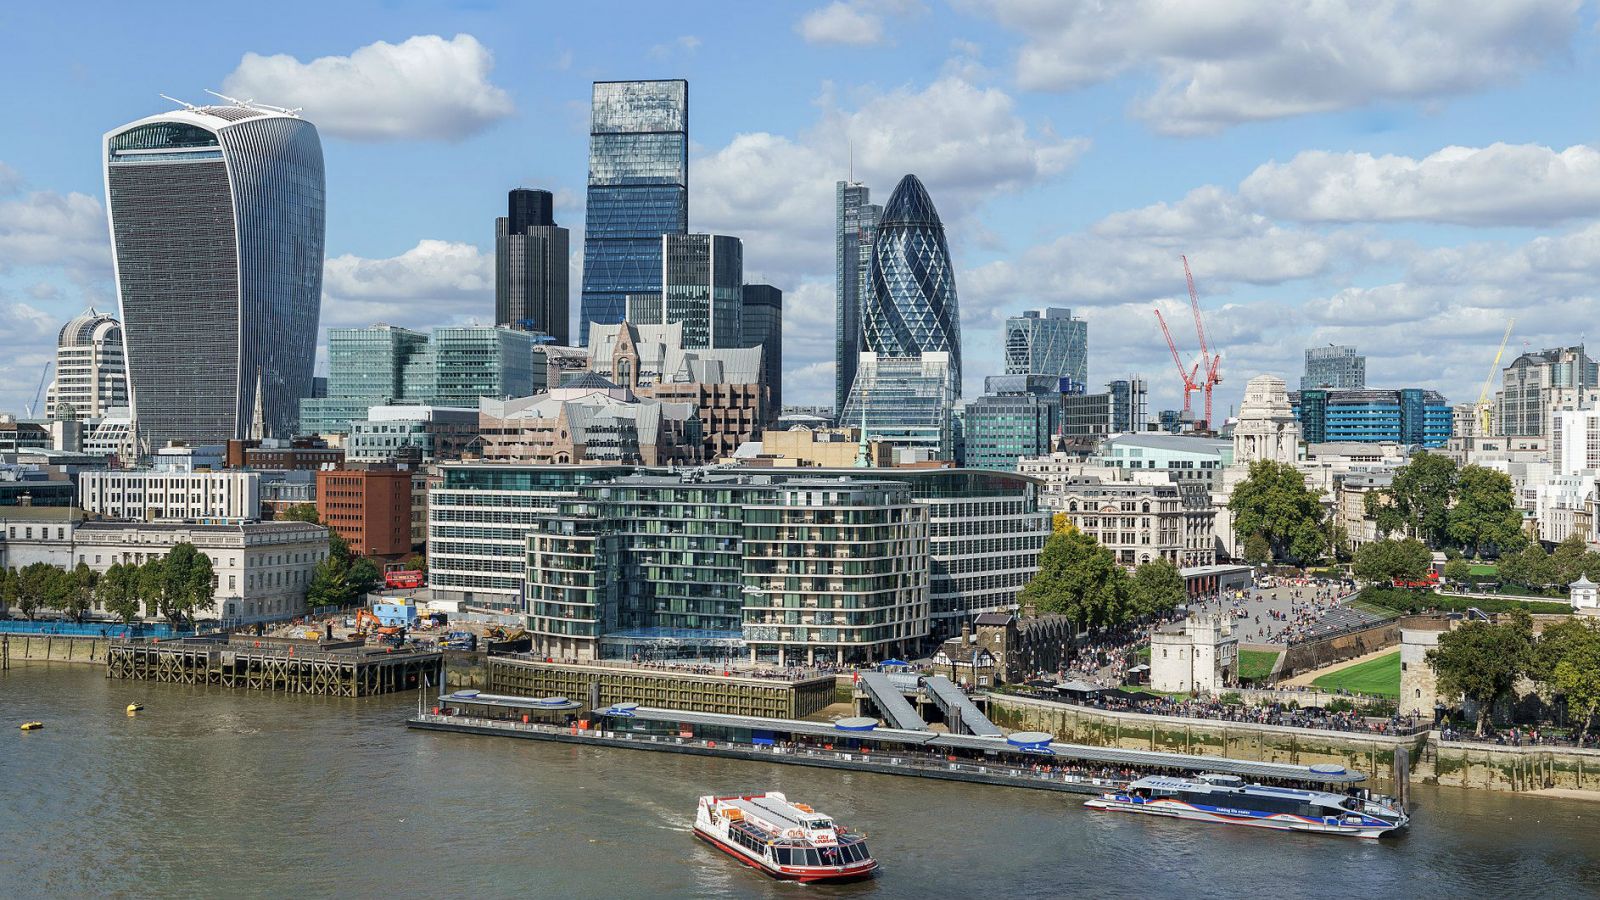 London Ranked Number 1 in Global Power City Index